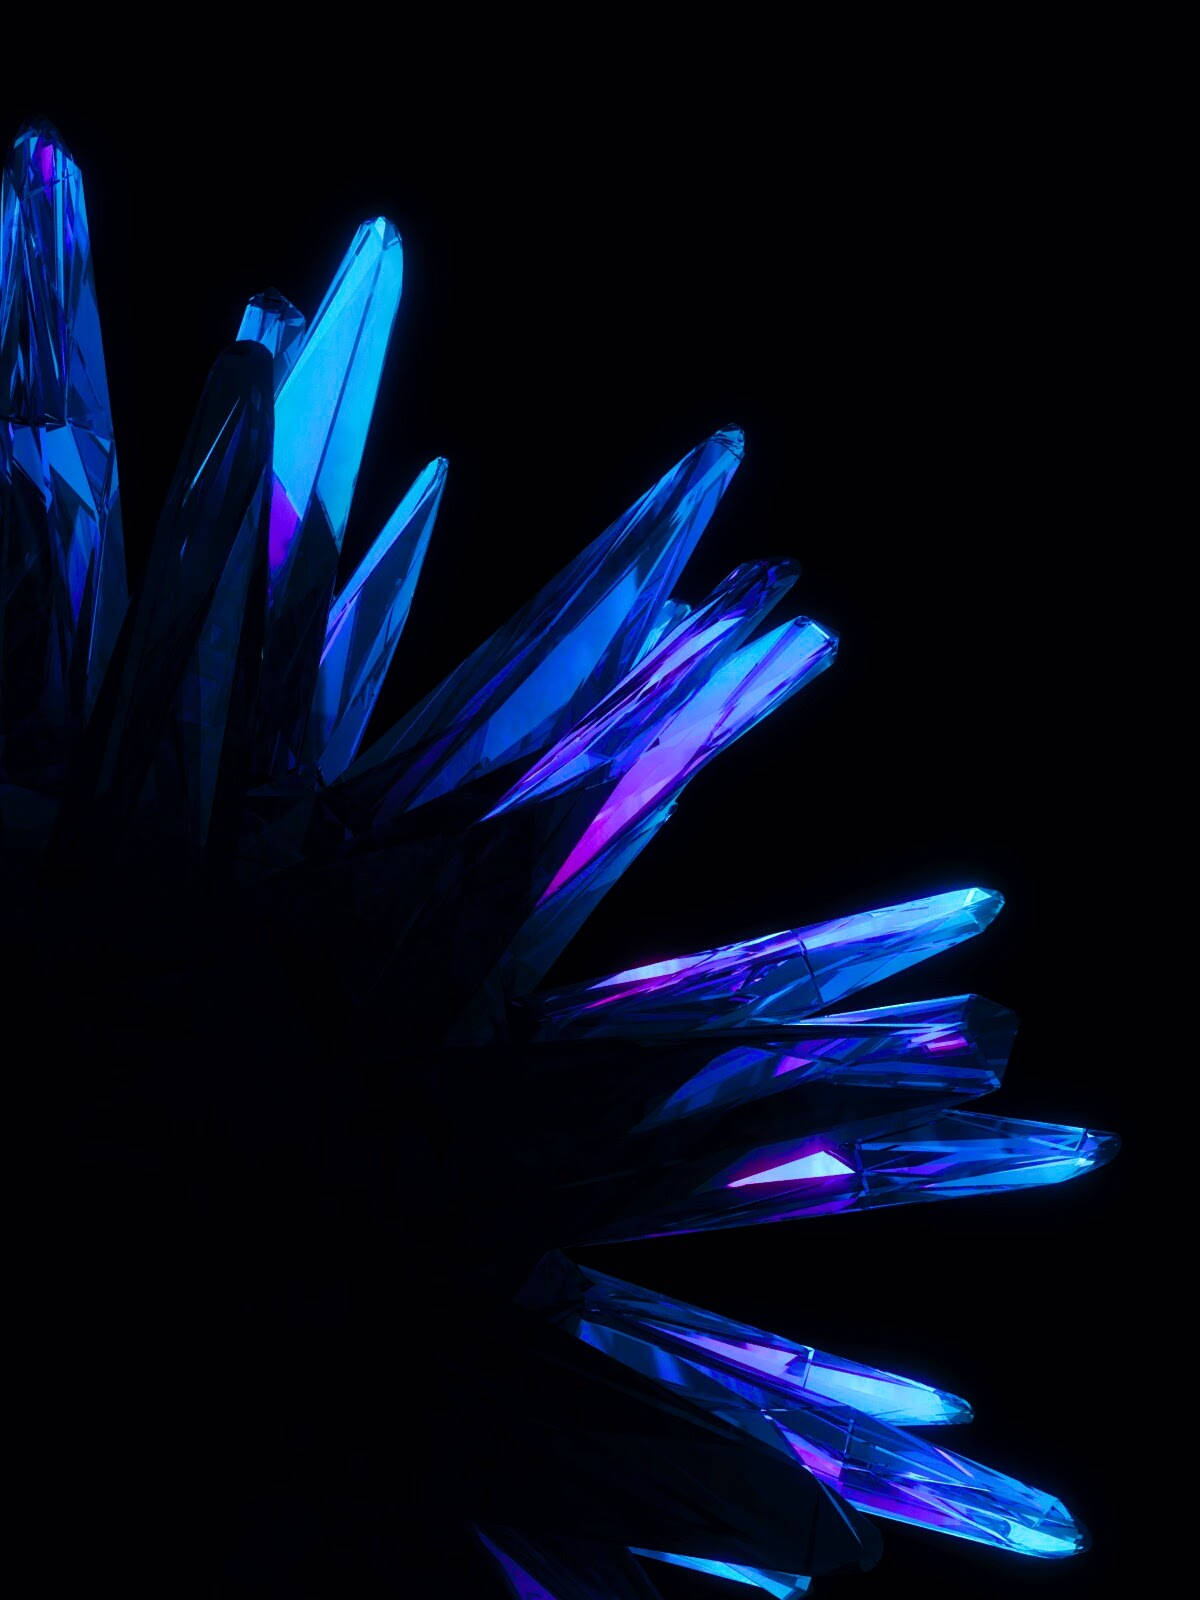 Icy Oled Crystals Wallpaper